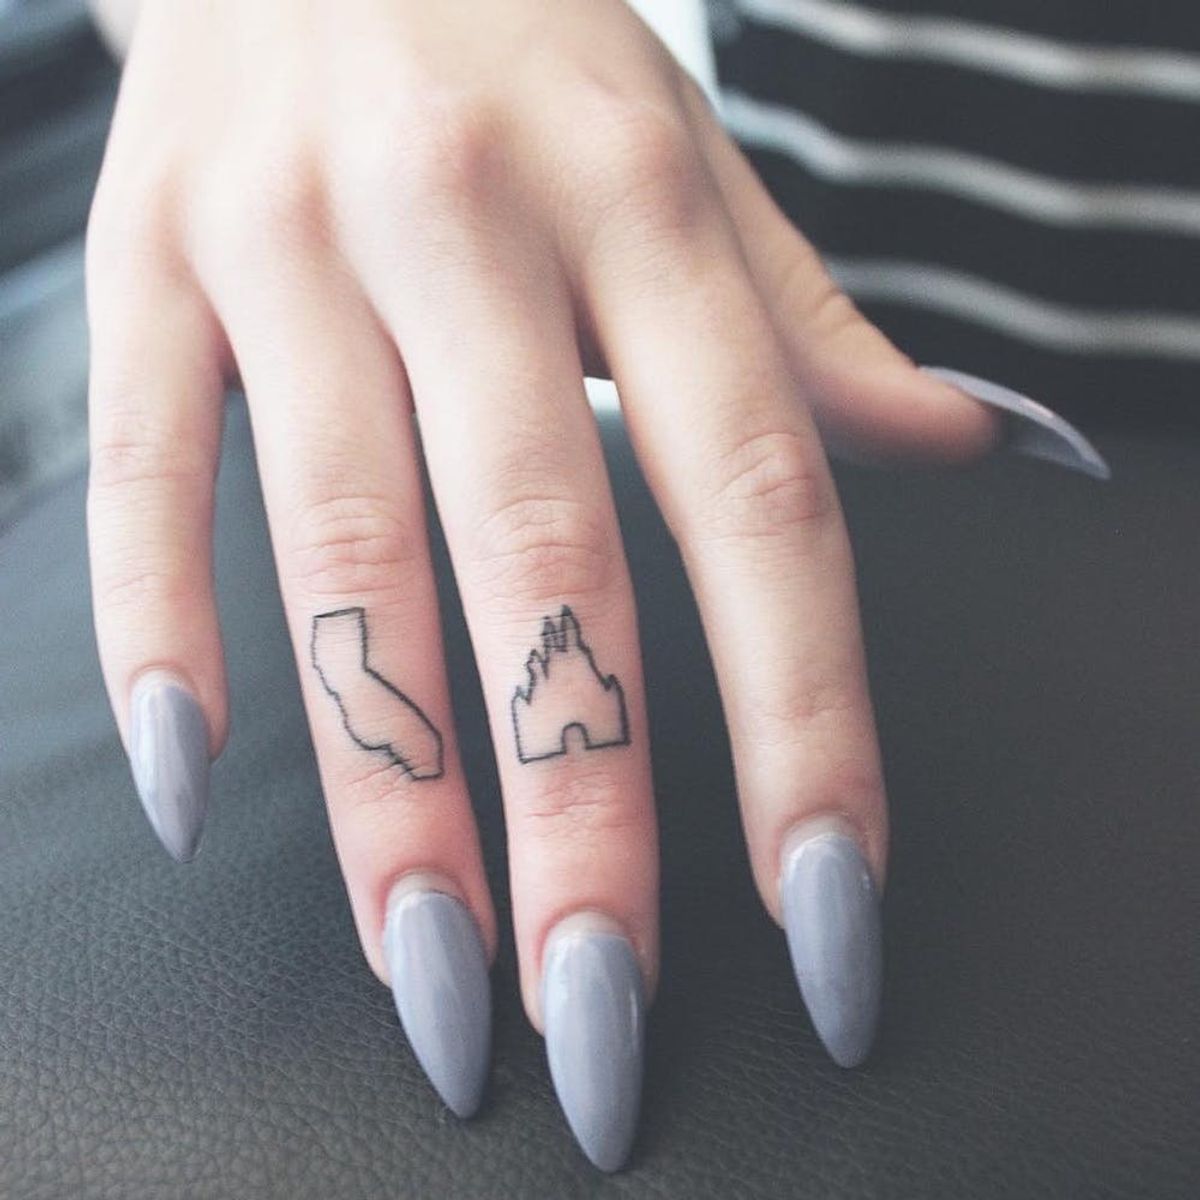 9 Tiny Disney Finger Tattoos You’ll Totally Want